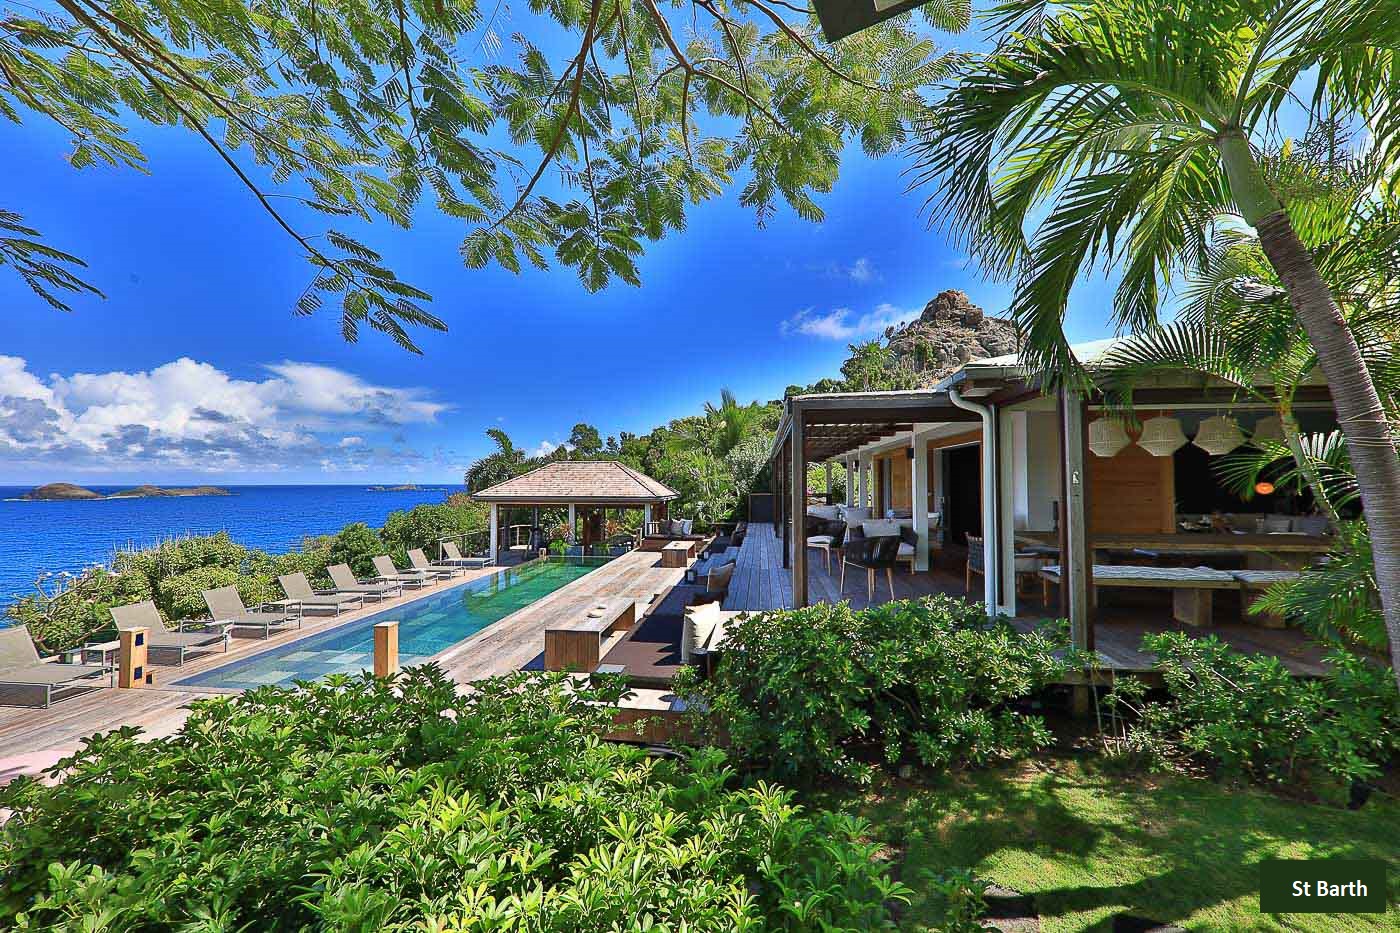 Location of Villa Canopee in St Barts, St Barths, St Barthelemy, St. Barth's,  St. Barth's, St. Barthelemy, Saint Barts, Saint Barths, Saint Barthelemy